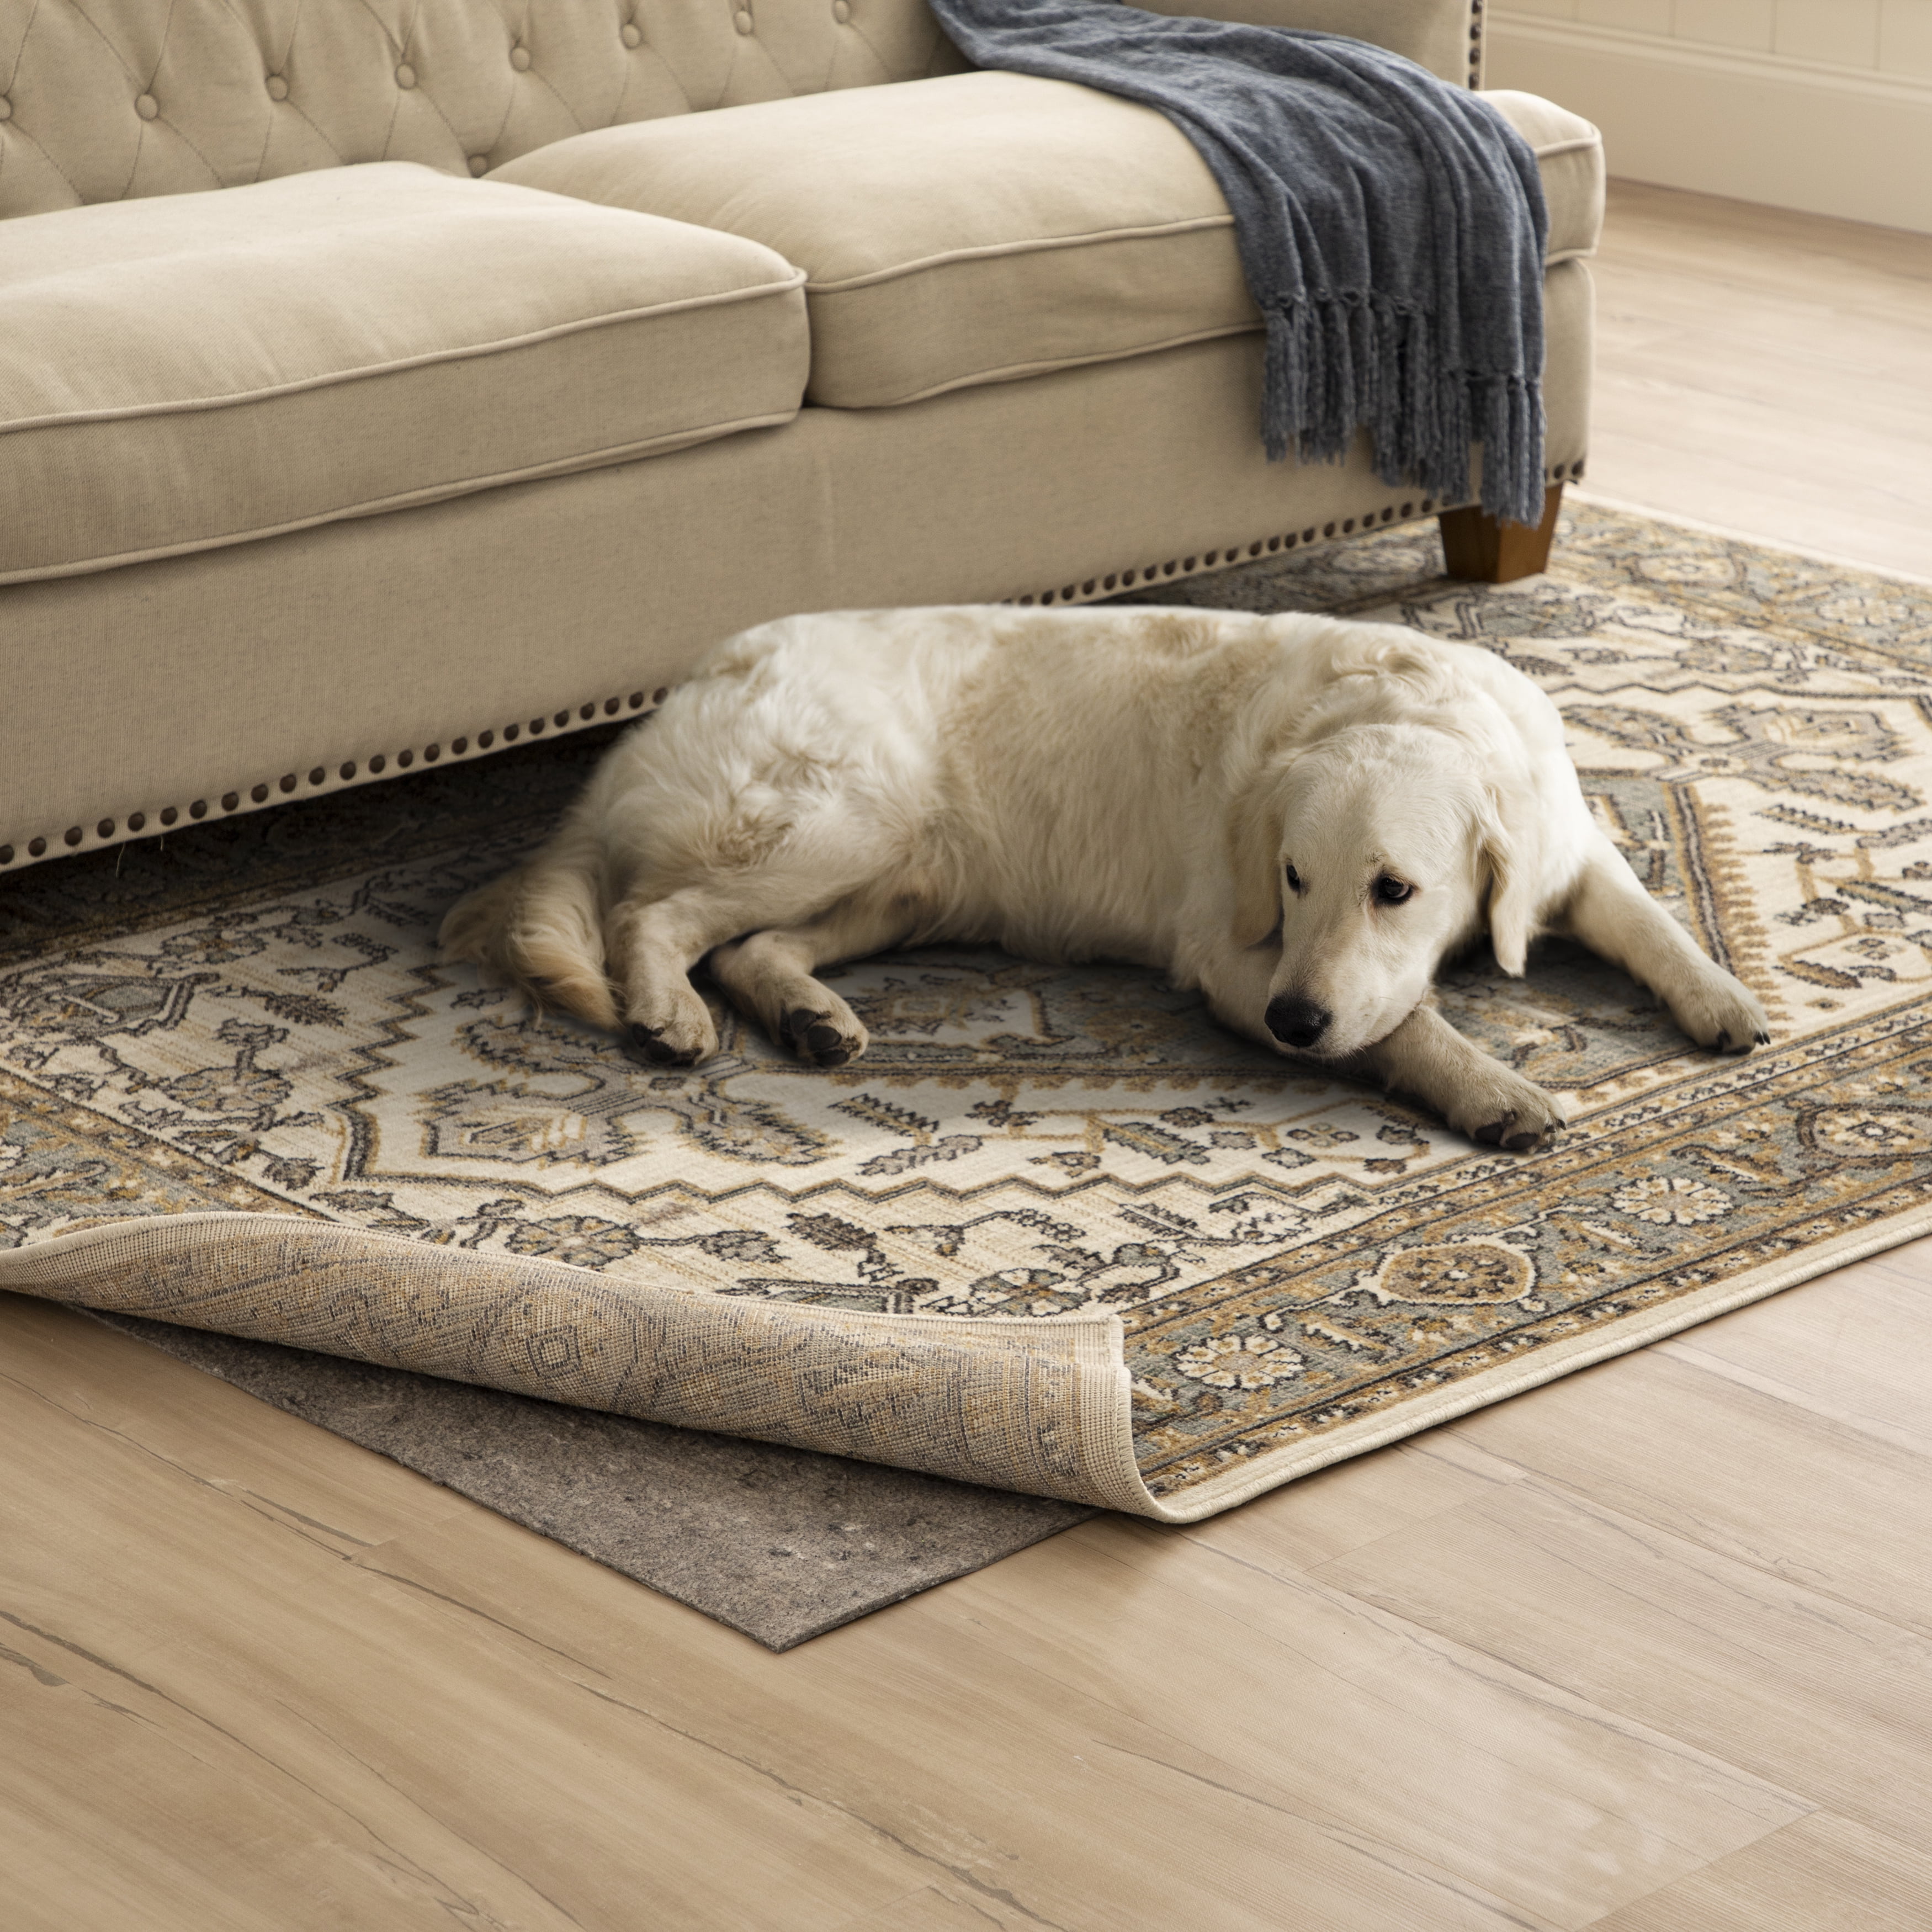 Mohawk Home Pet Friendly Rug Pad 2 X, Best Rugs For Living Room With Dogs